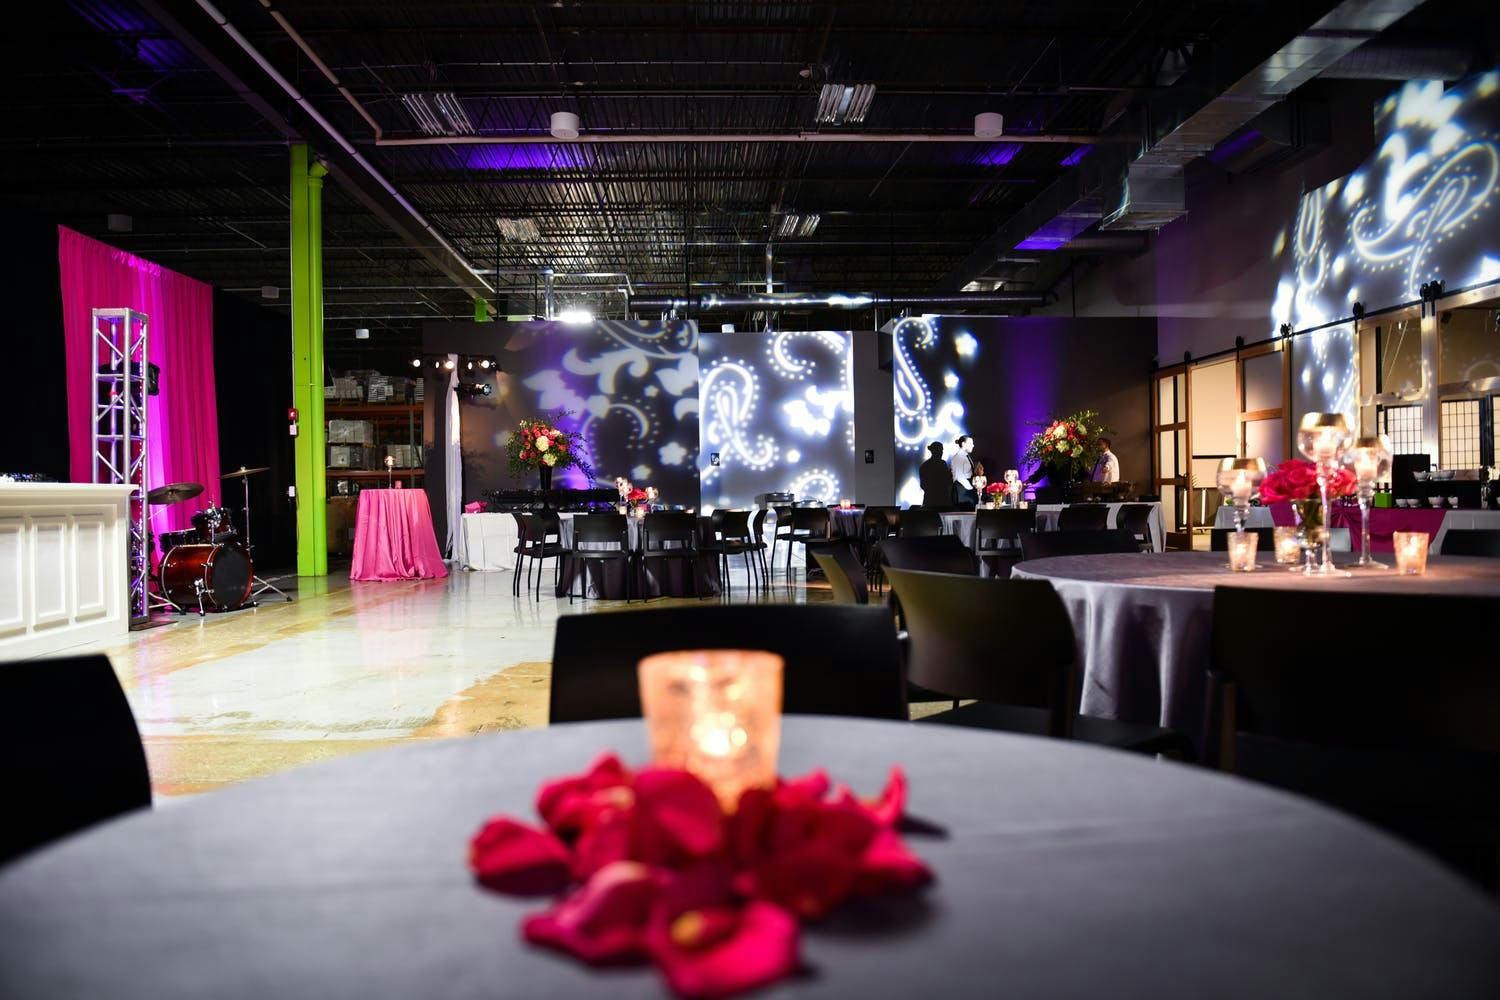 40th Birthday at industrial Venue With Paisley Wall Lighting | PartySlate